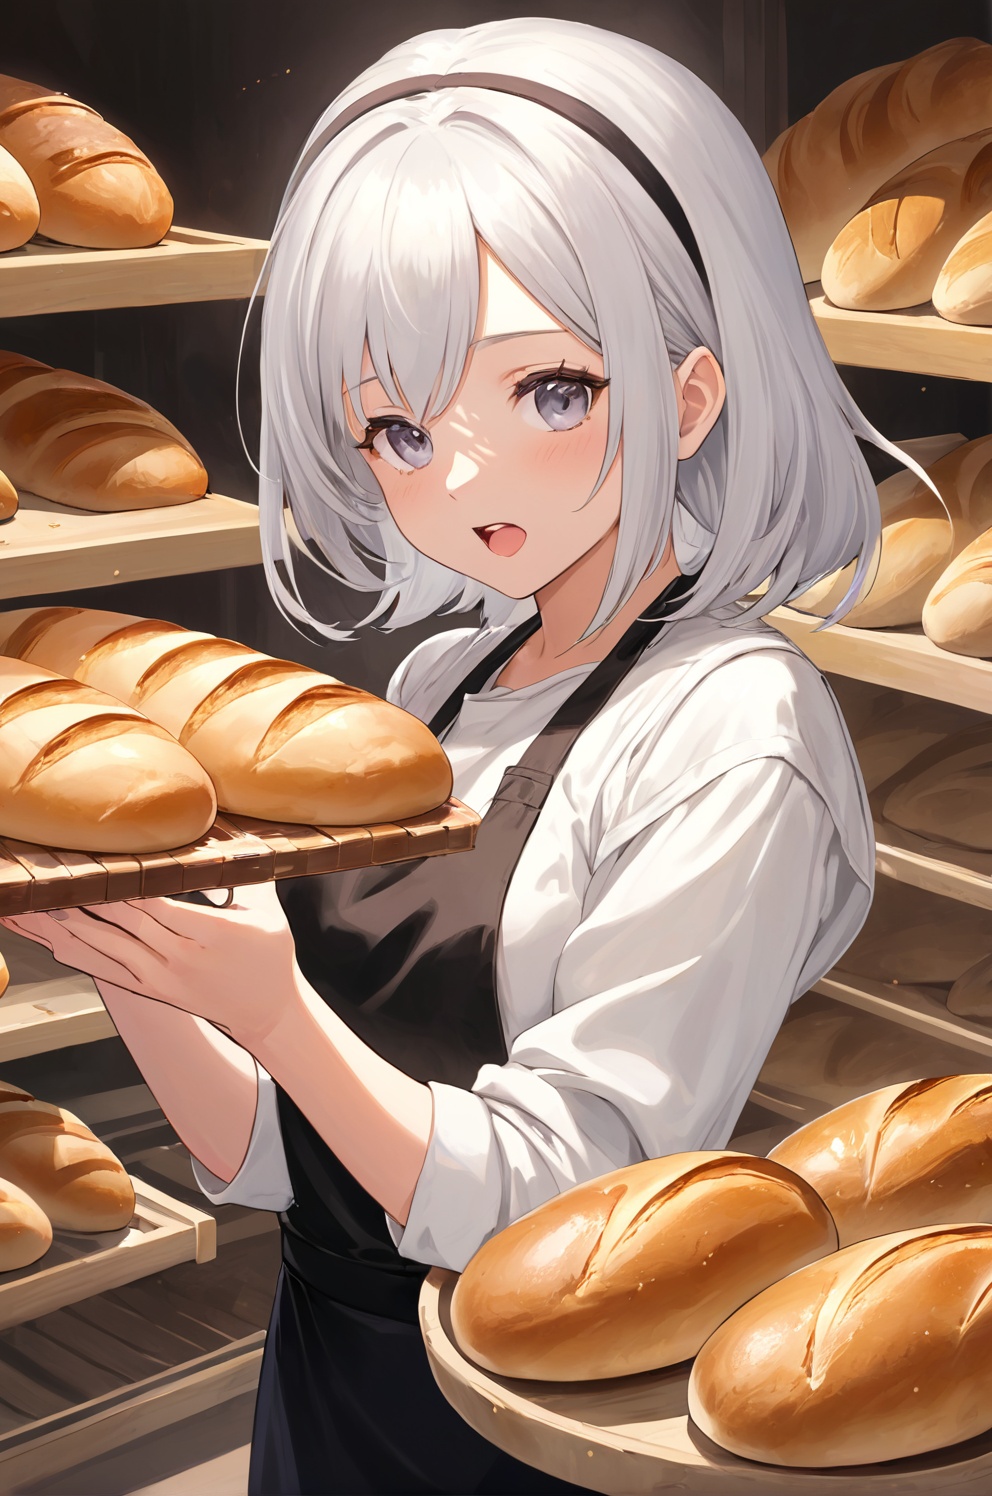 Bread and Butter | Aesthetic anime, Anime bento, Anime gifts